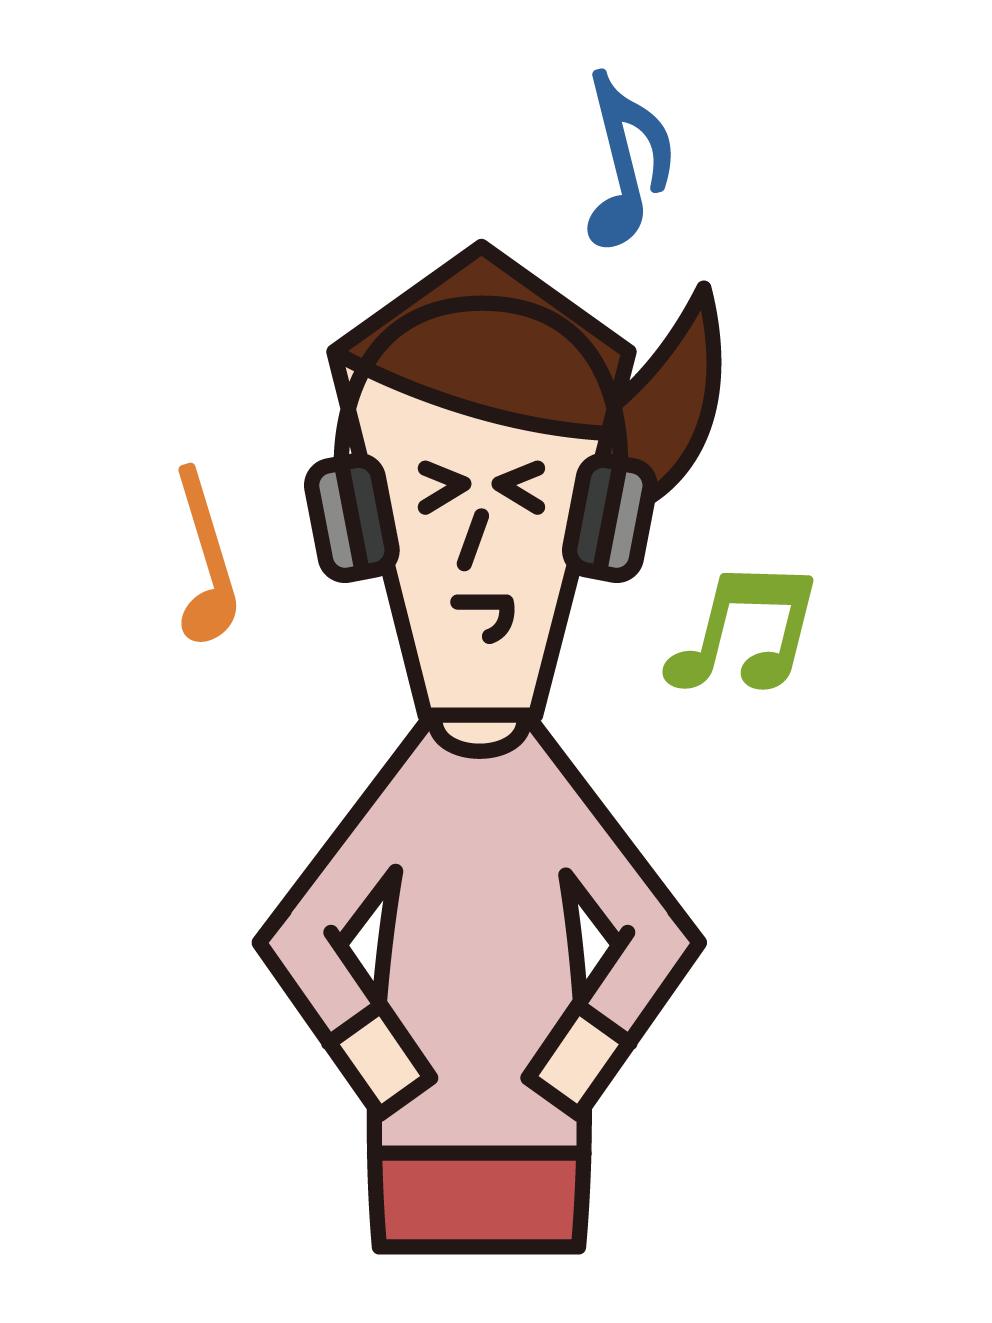 Illustration of a person (female) listening to music with headphones